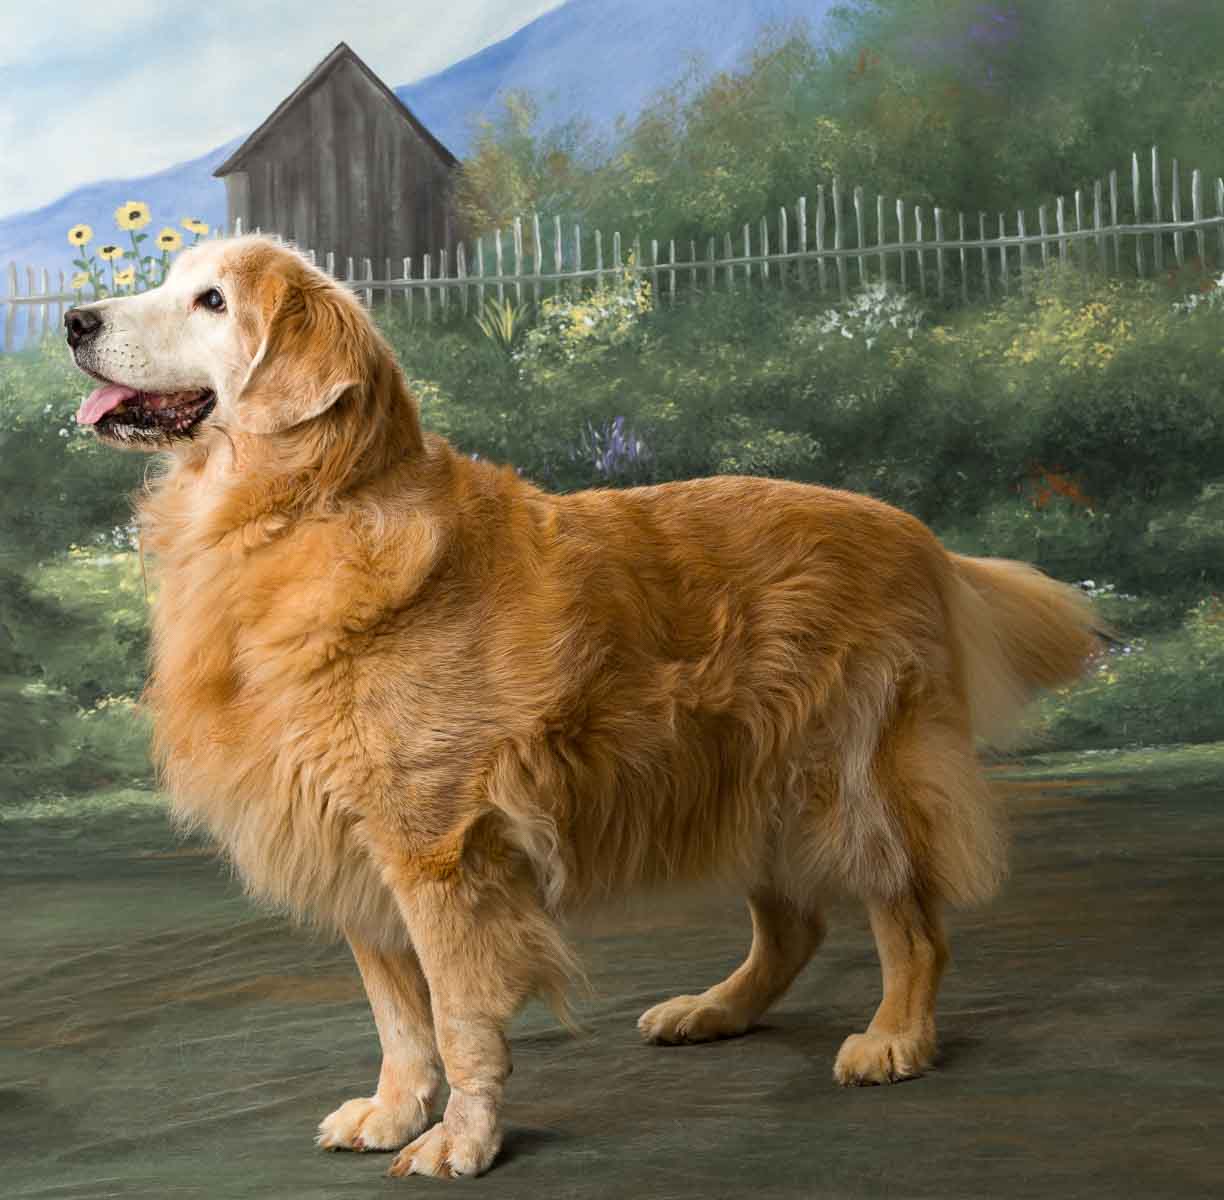 A golden retriever standing in front of a fence.